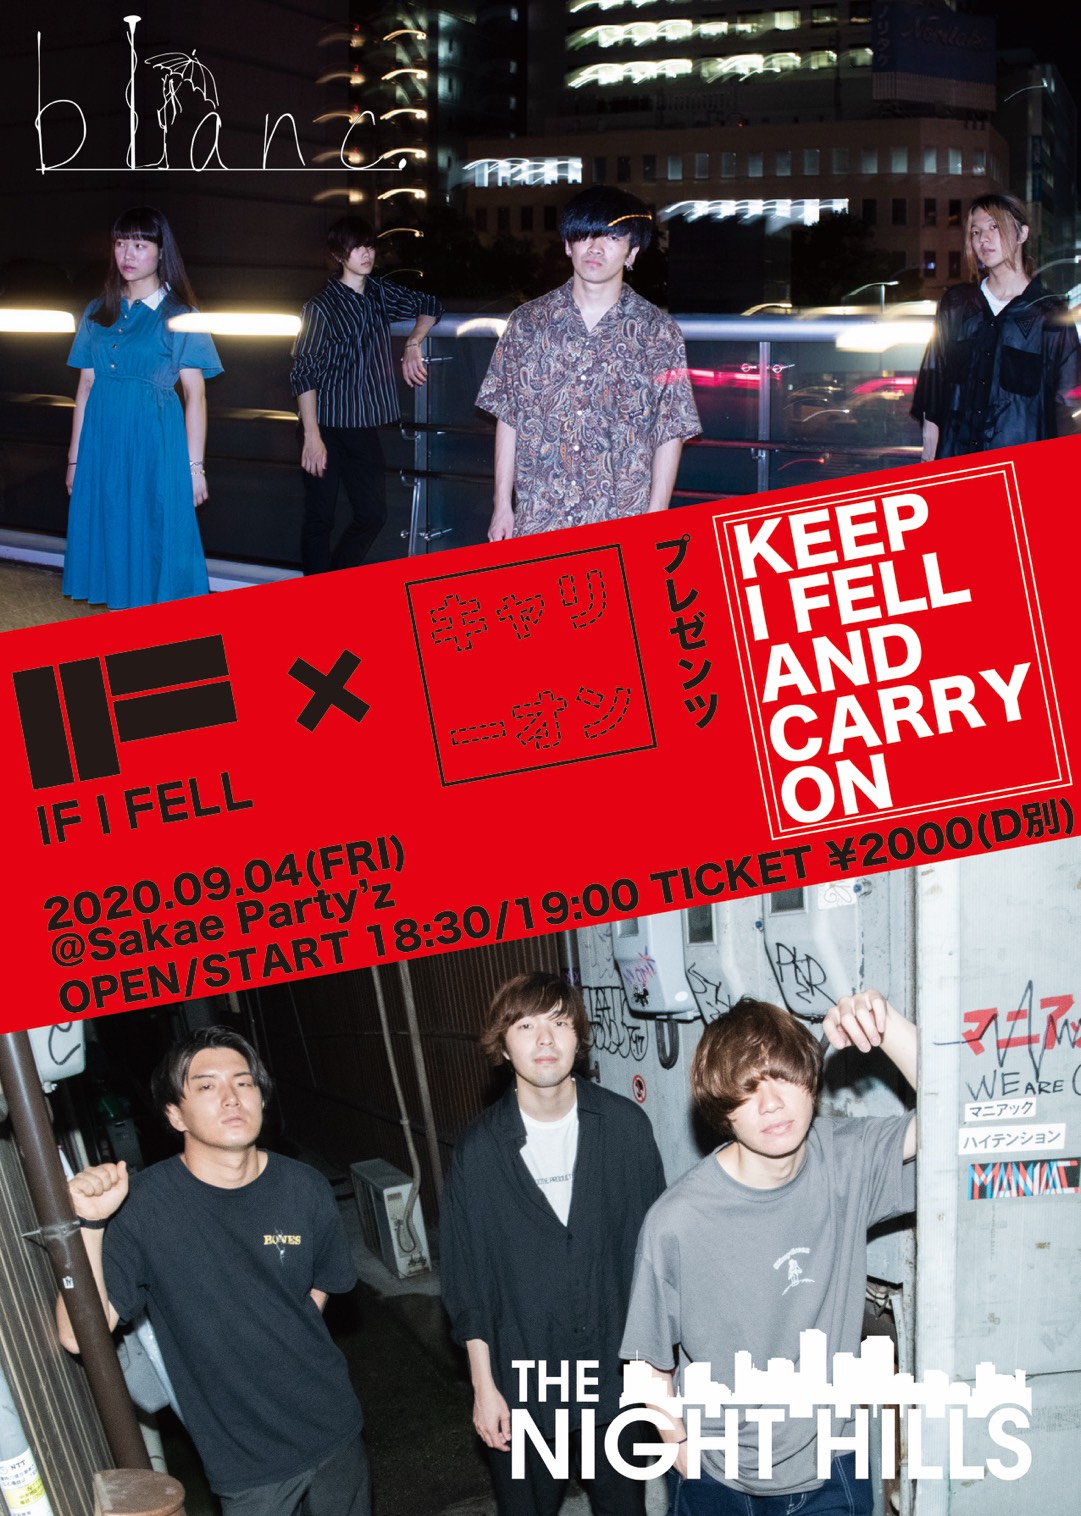 IF I FELL × Carry On プレゼンツ  "KEEP I FELL AND CARRY ON"